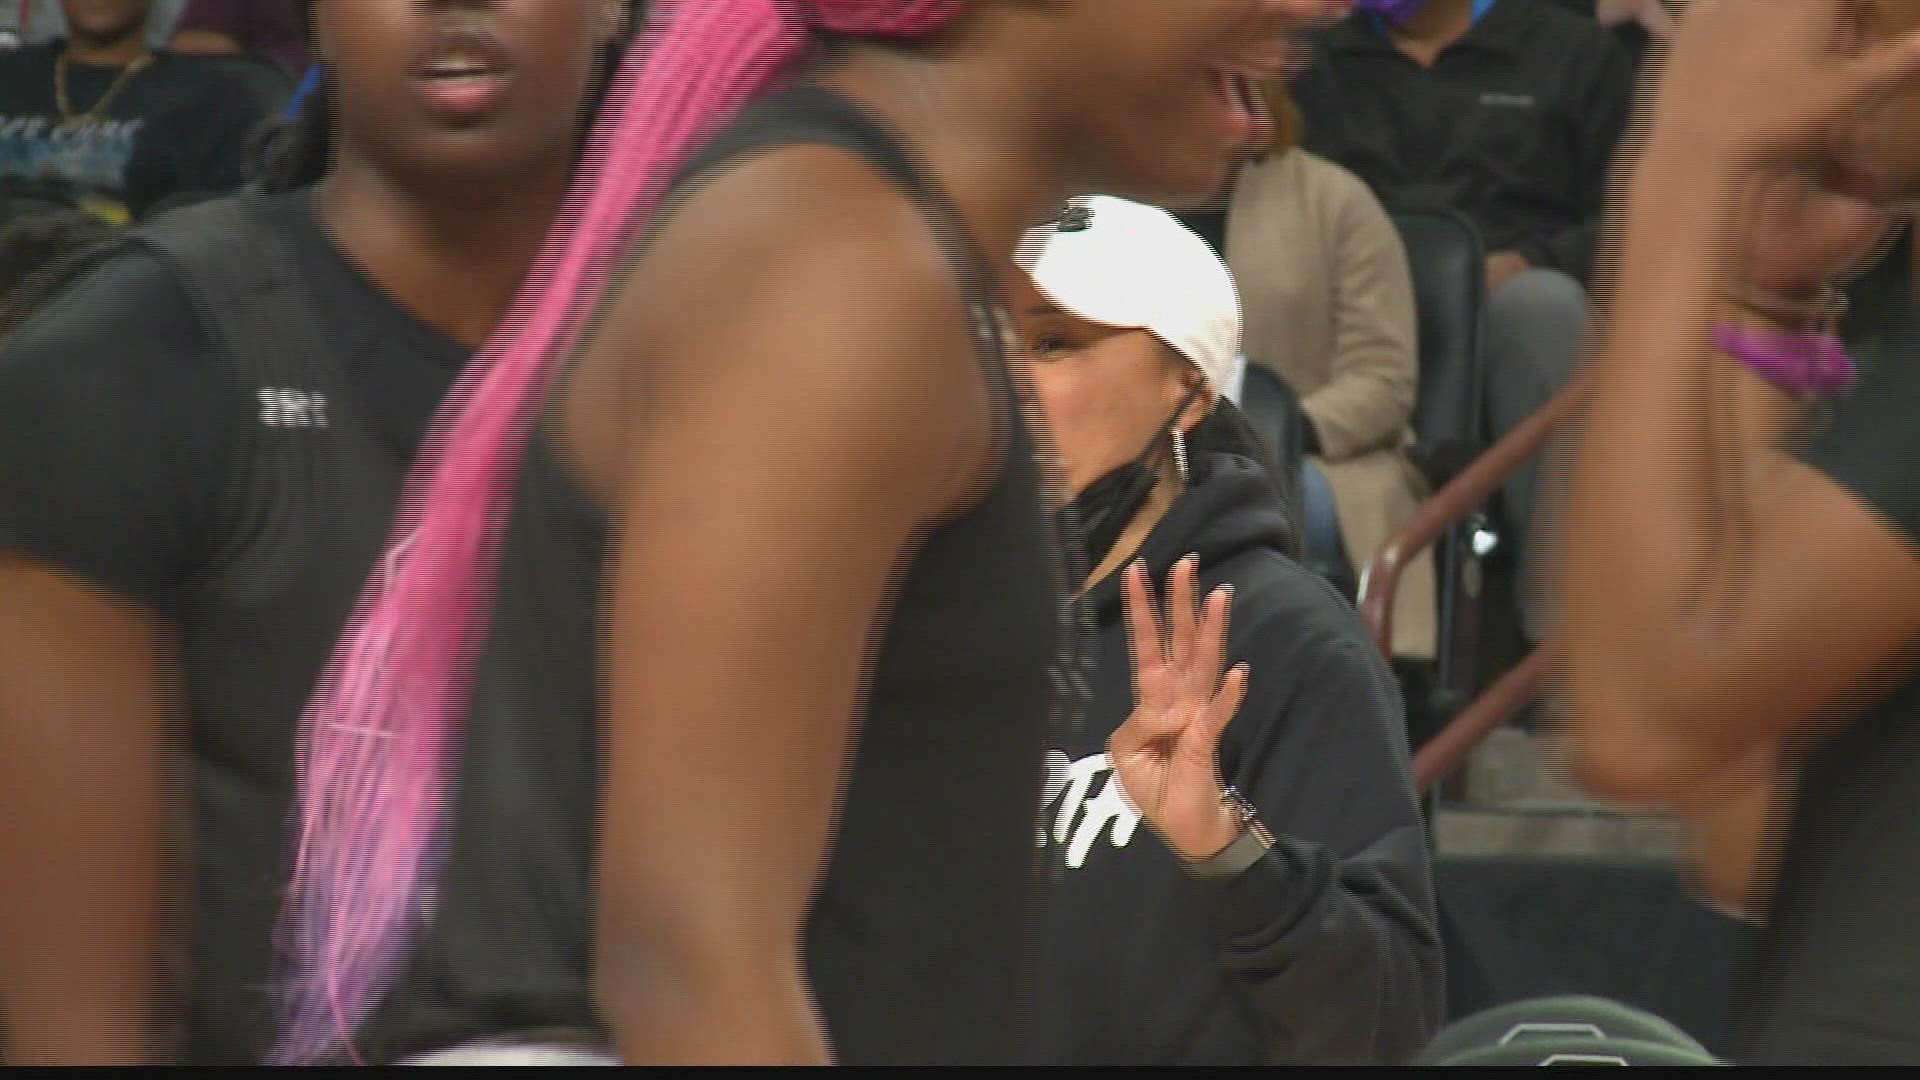 The South Carolina women's basketball team held an open practice with some entertainment mixed as part of its NCAA Selection Show watch party.